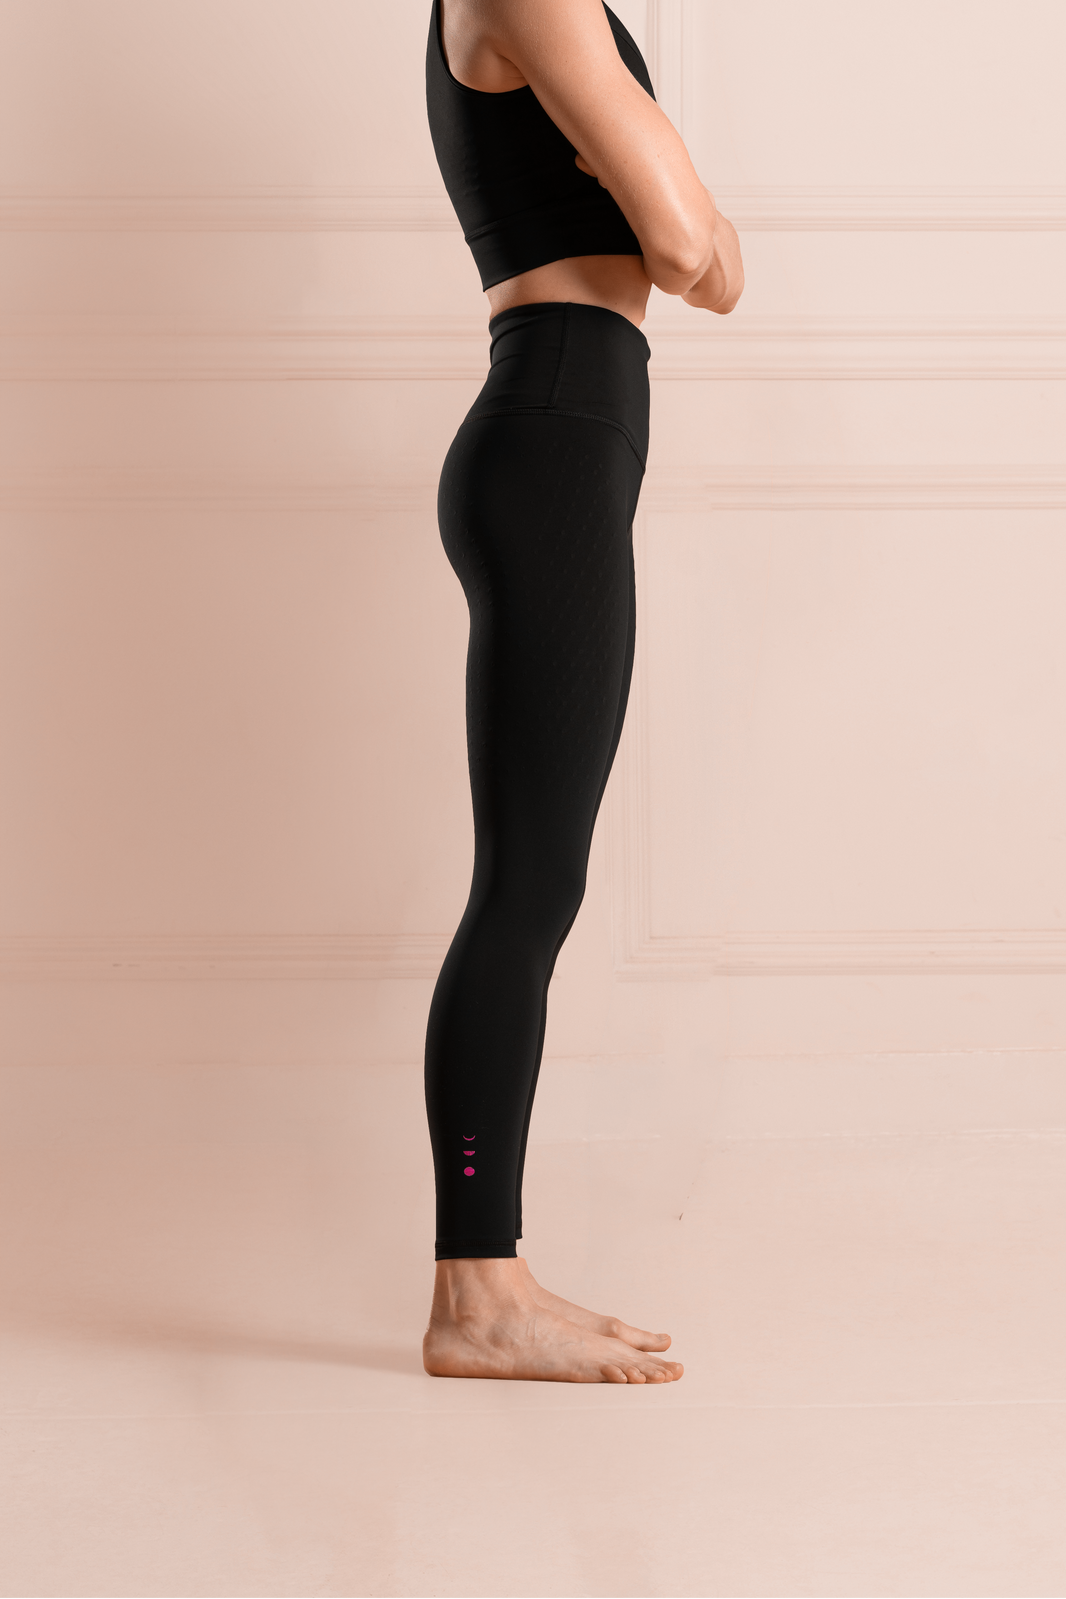 L'Original 27'' Leggings - Supporting Breast Cancer Thrivers